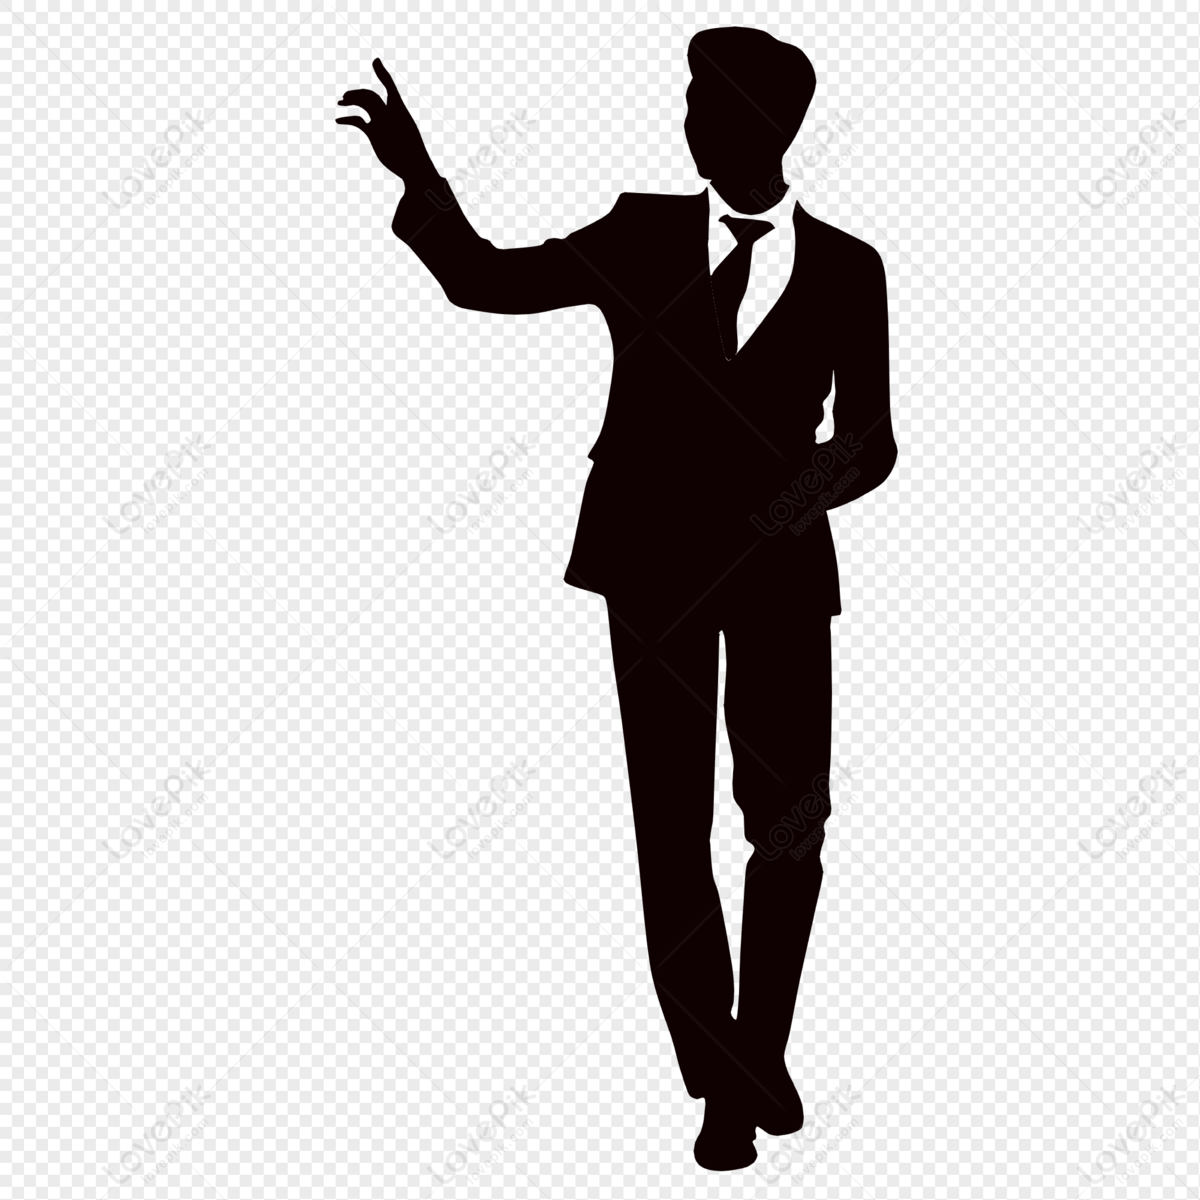 Business People Silhouettes, Business People, Business Silhouette, Men ...